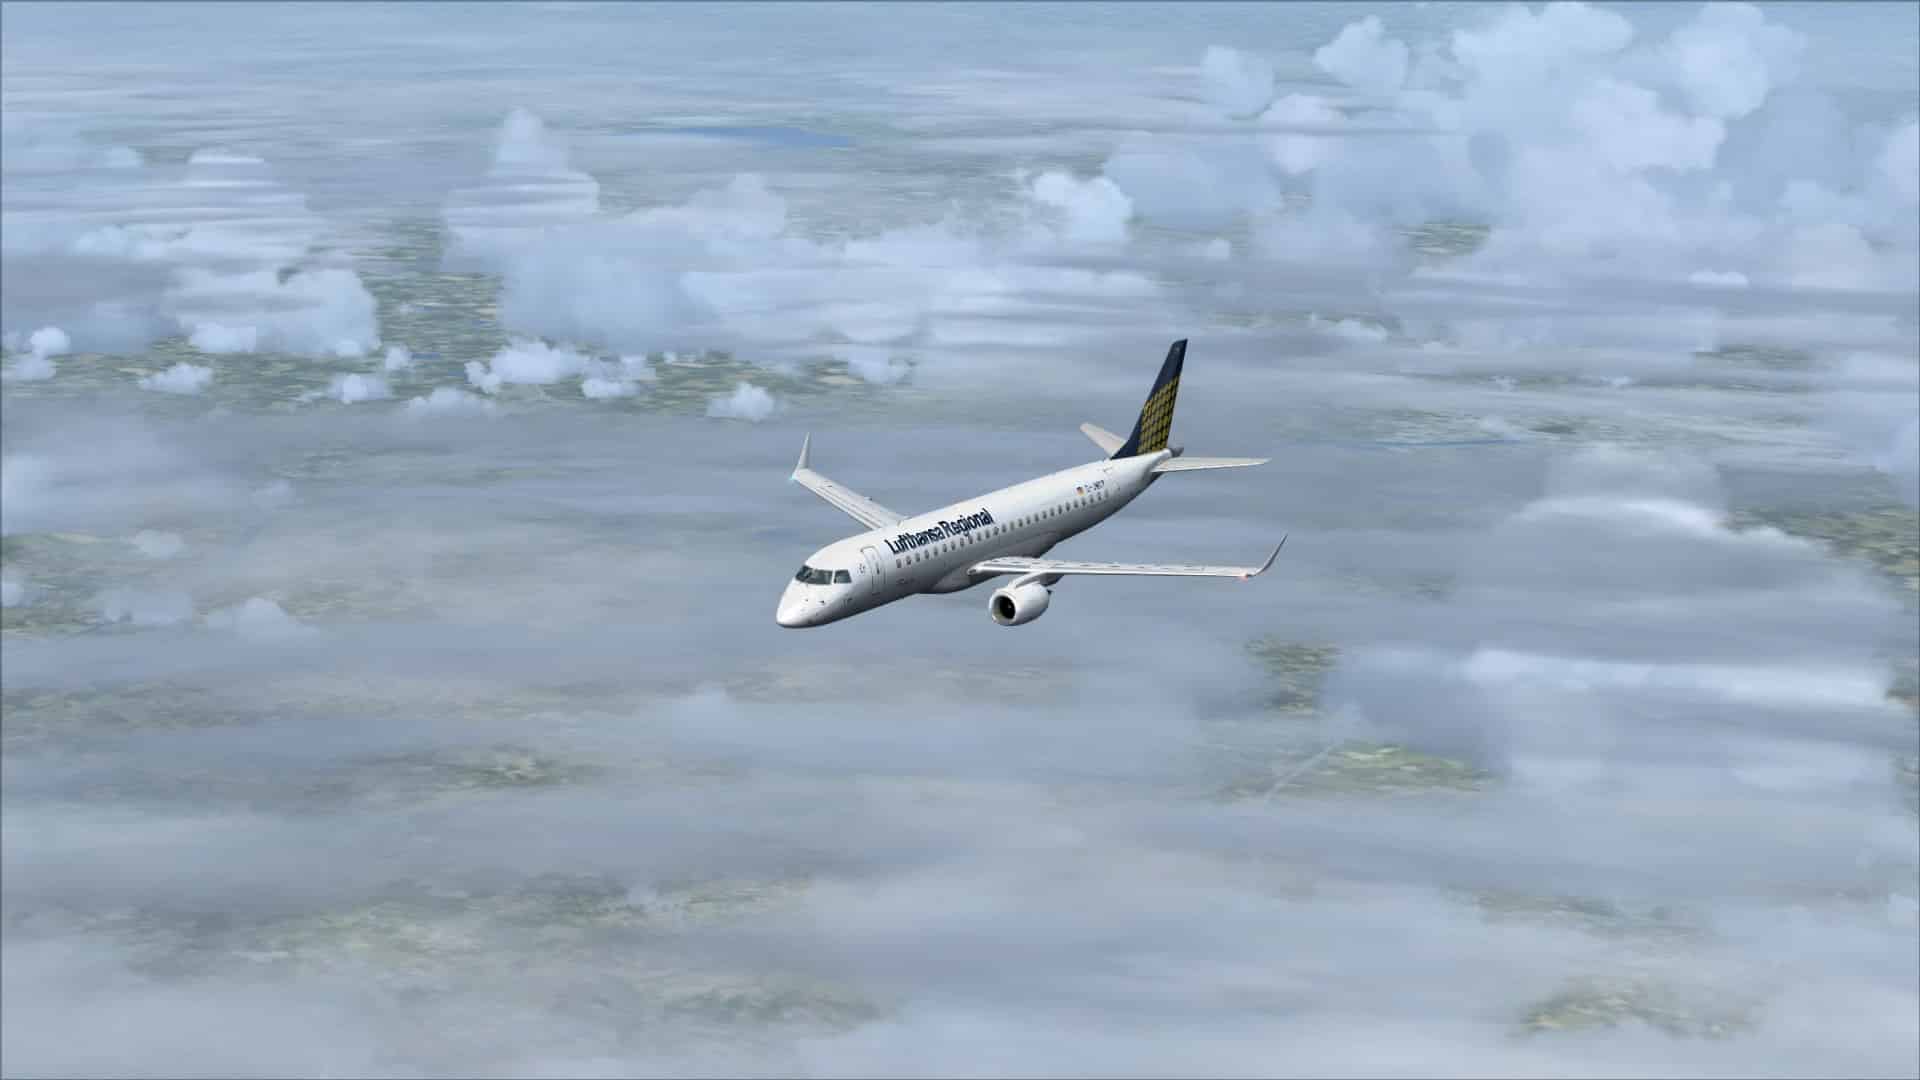 fs2004 fs global real weather